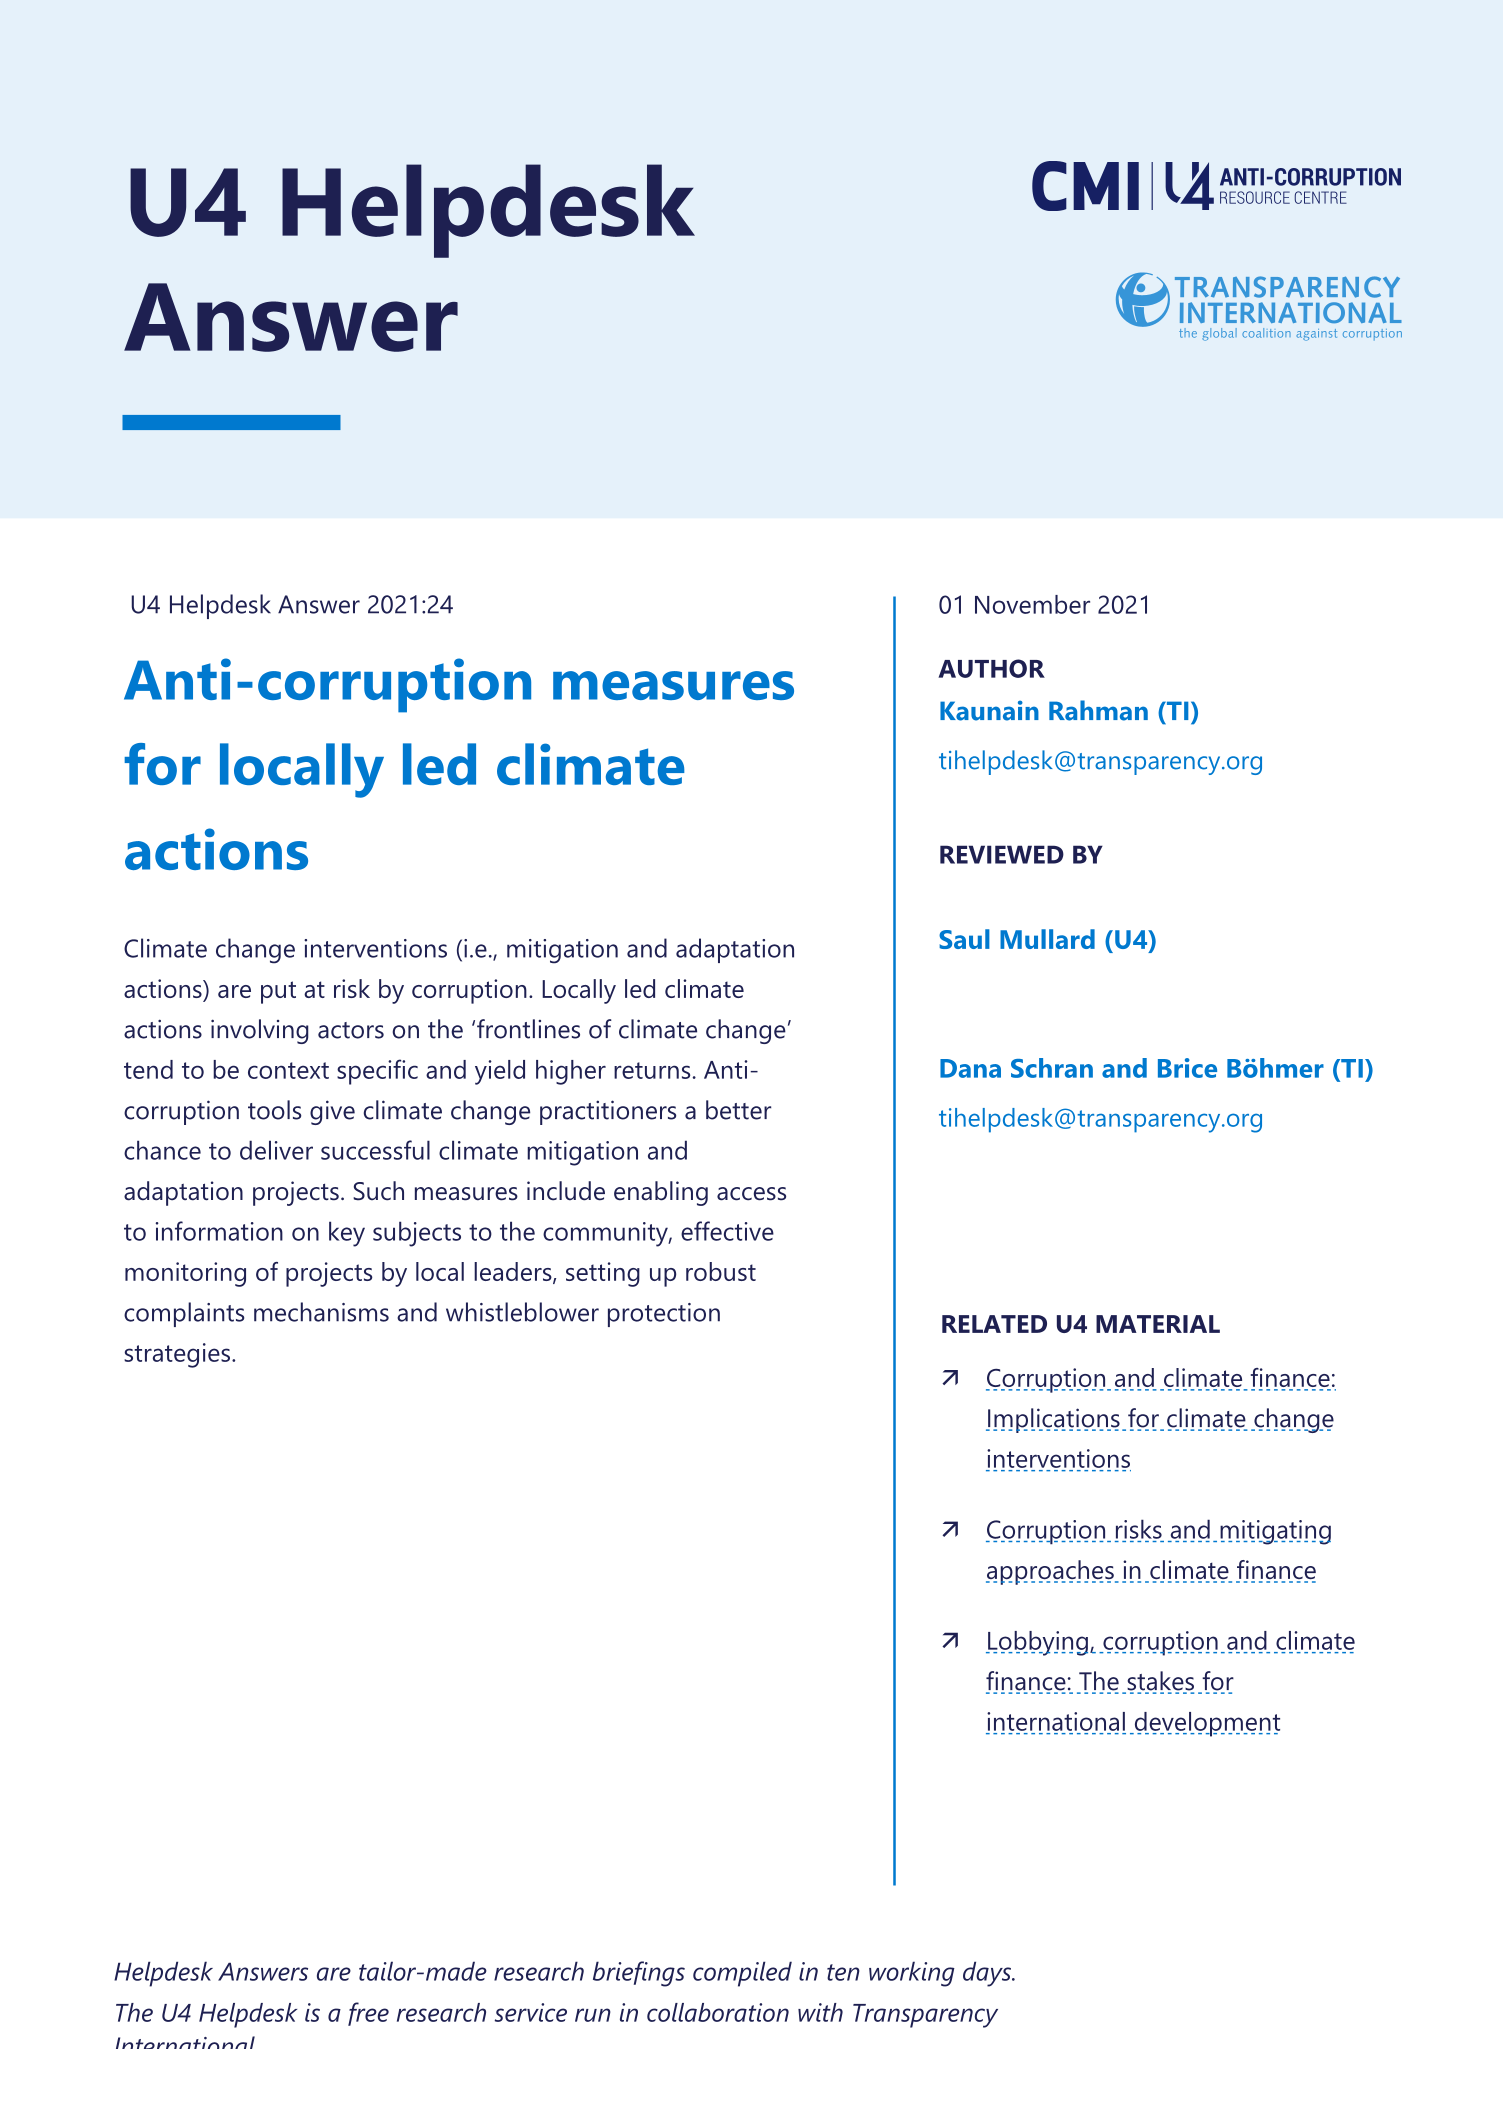 Anti-corruption measures for locally led climate actions